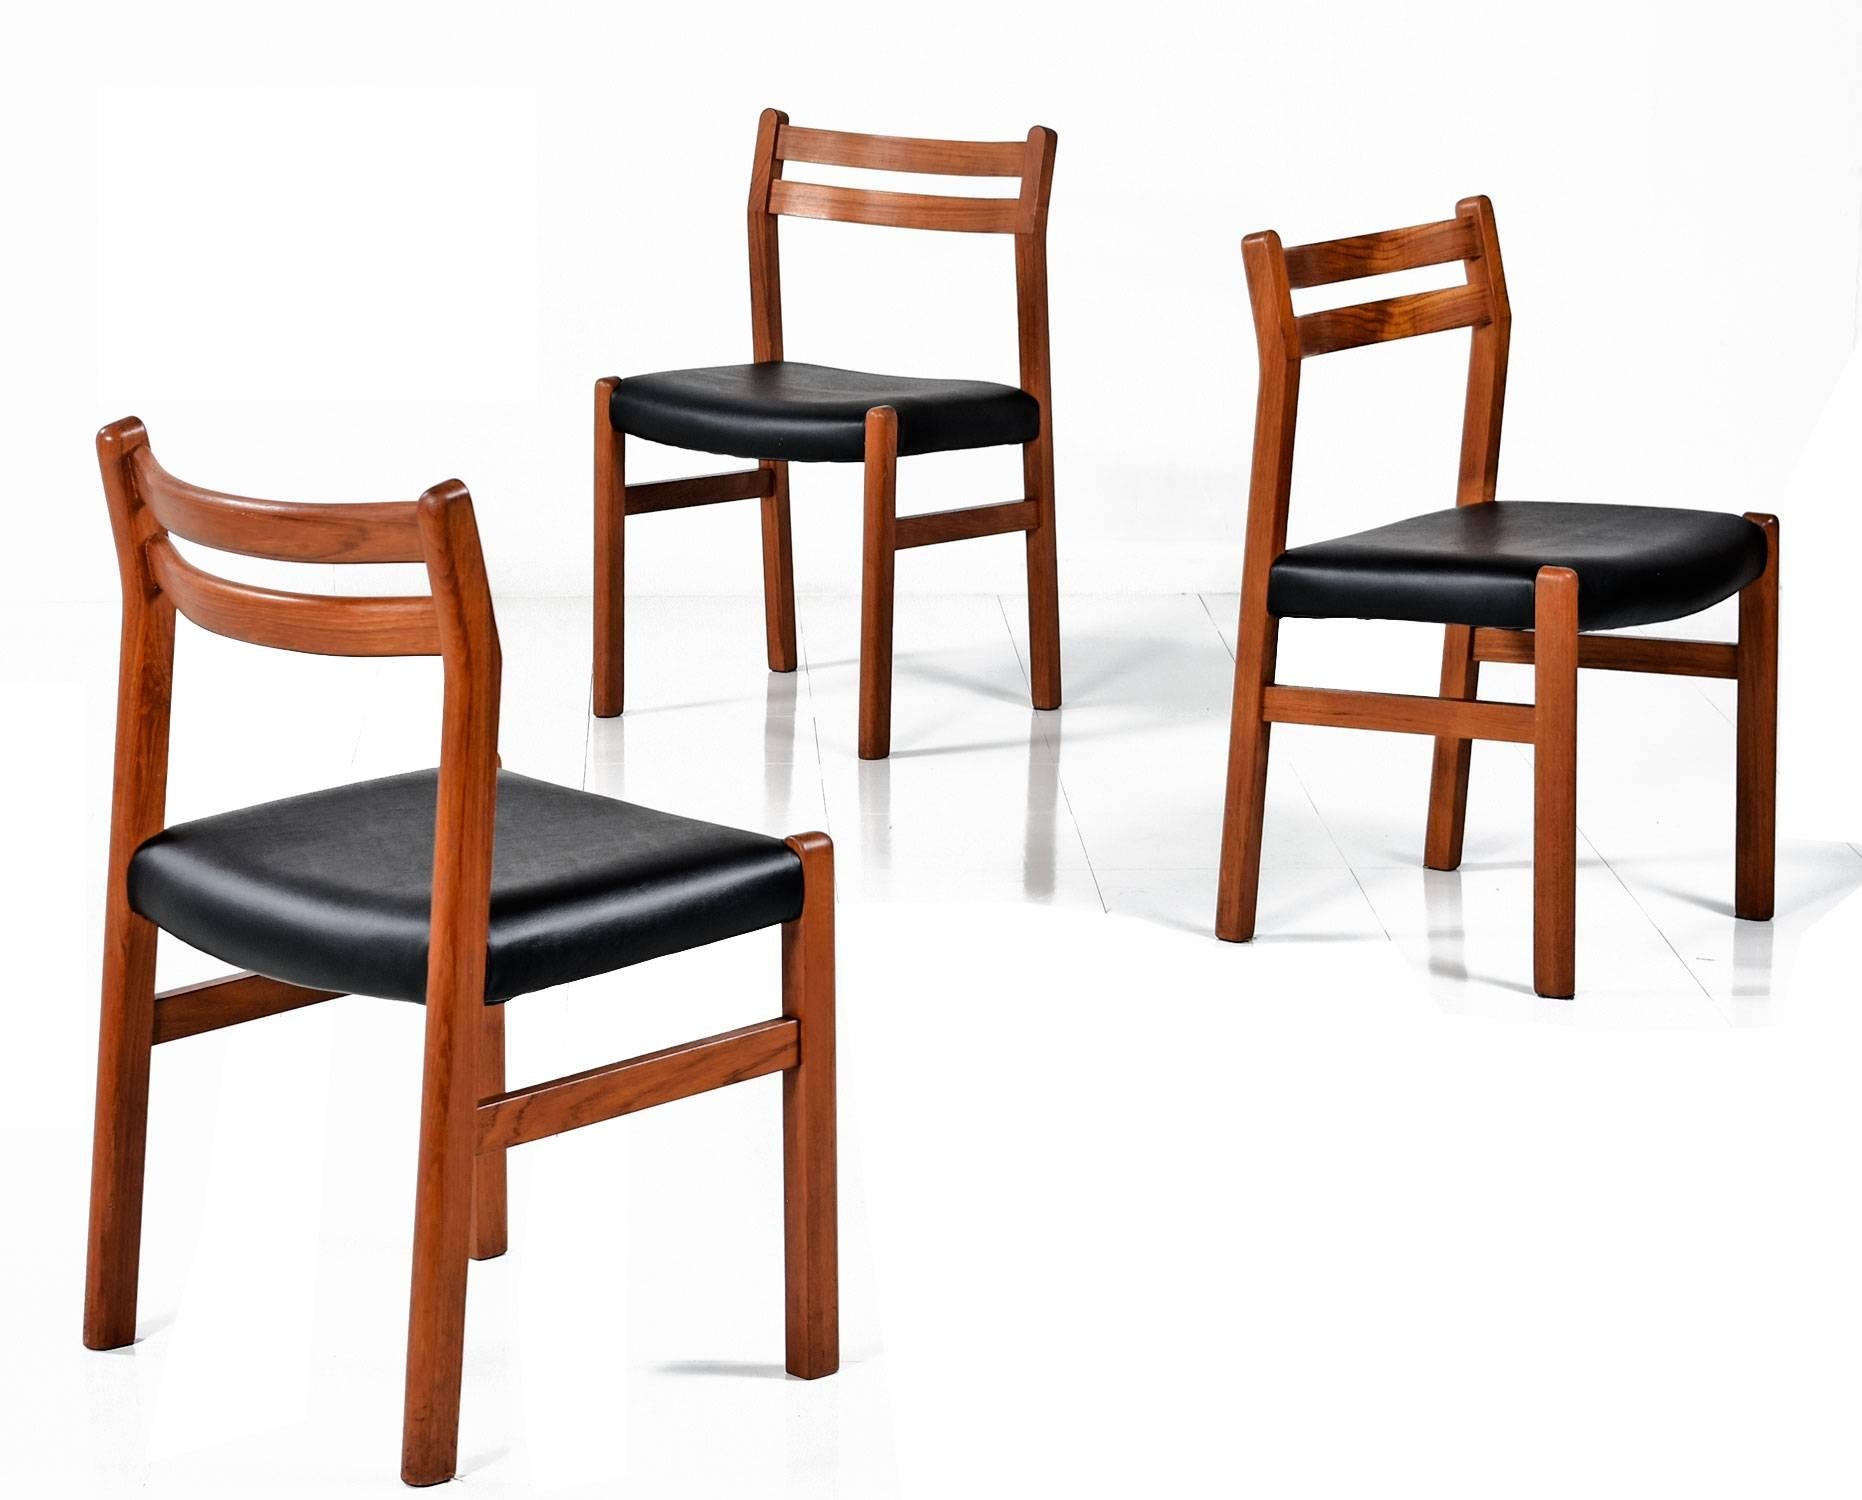 Set of six solid teak vintage Danish modern dining chairs. The quintessential Scandinavian design features a Minimalist approach with two contoured lateral spanners to support the back. The seats have been updated with new high quality black vinyl